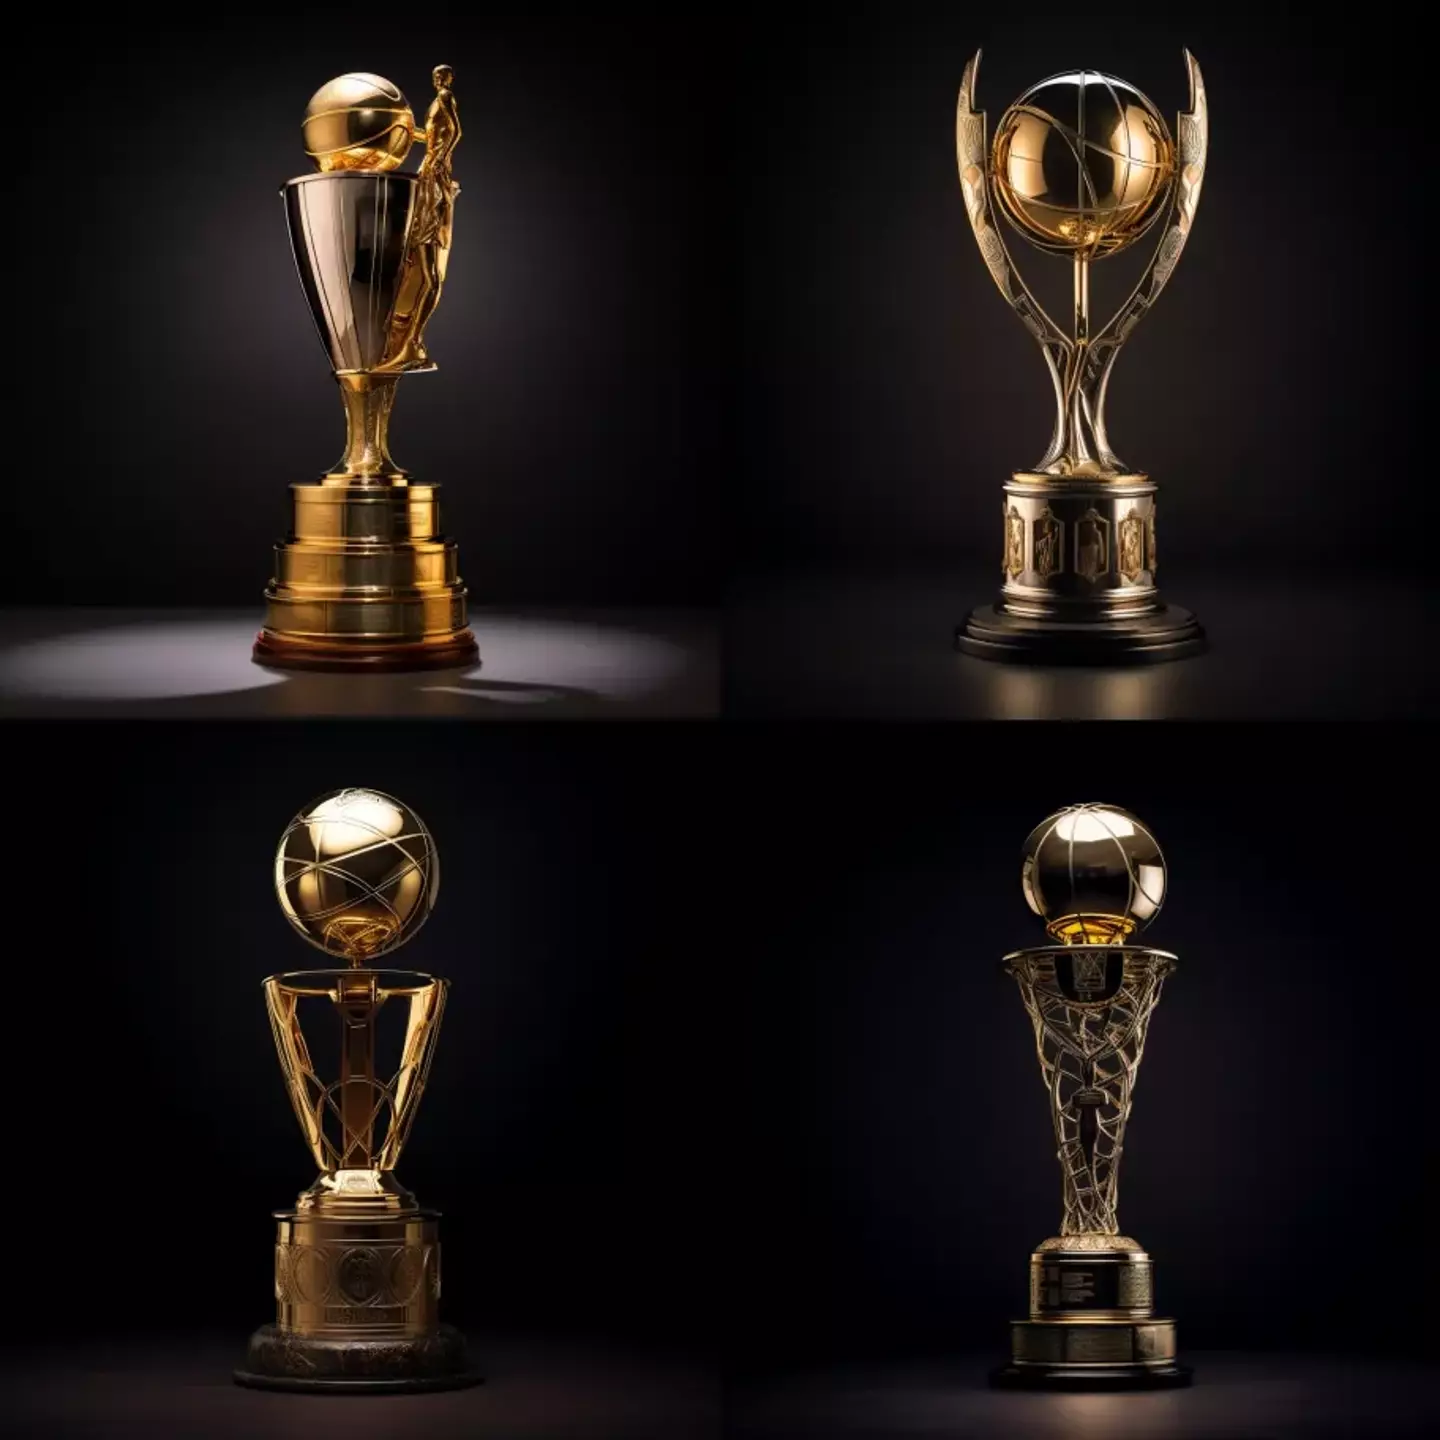 Imagined evolution of the Larry O'Brien Championship trophy.